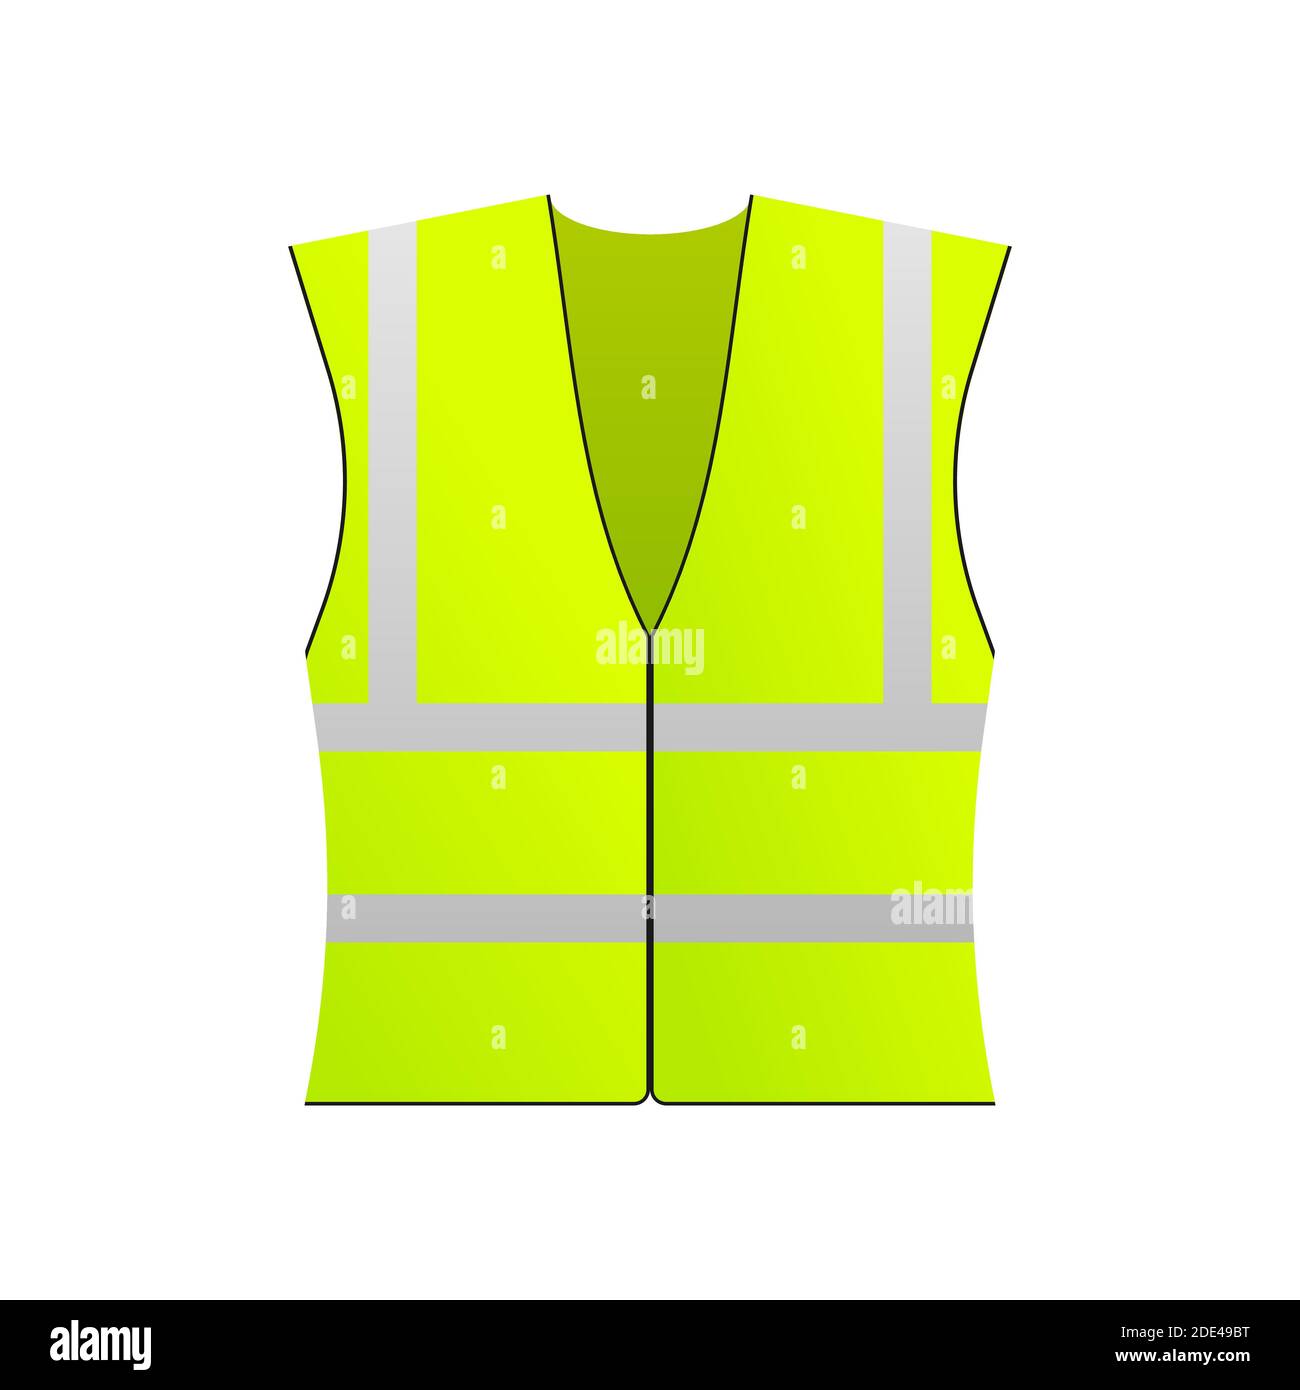 Safety jacket security. Yellow work uniform with reflective stripes. Vector stock illustration. Stock Vector